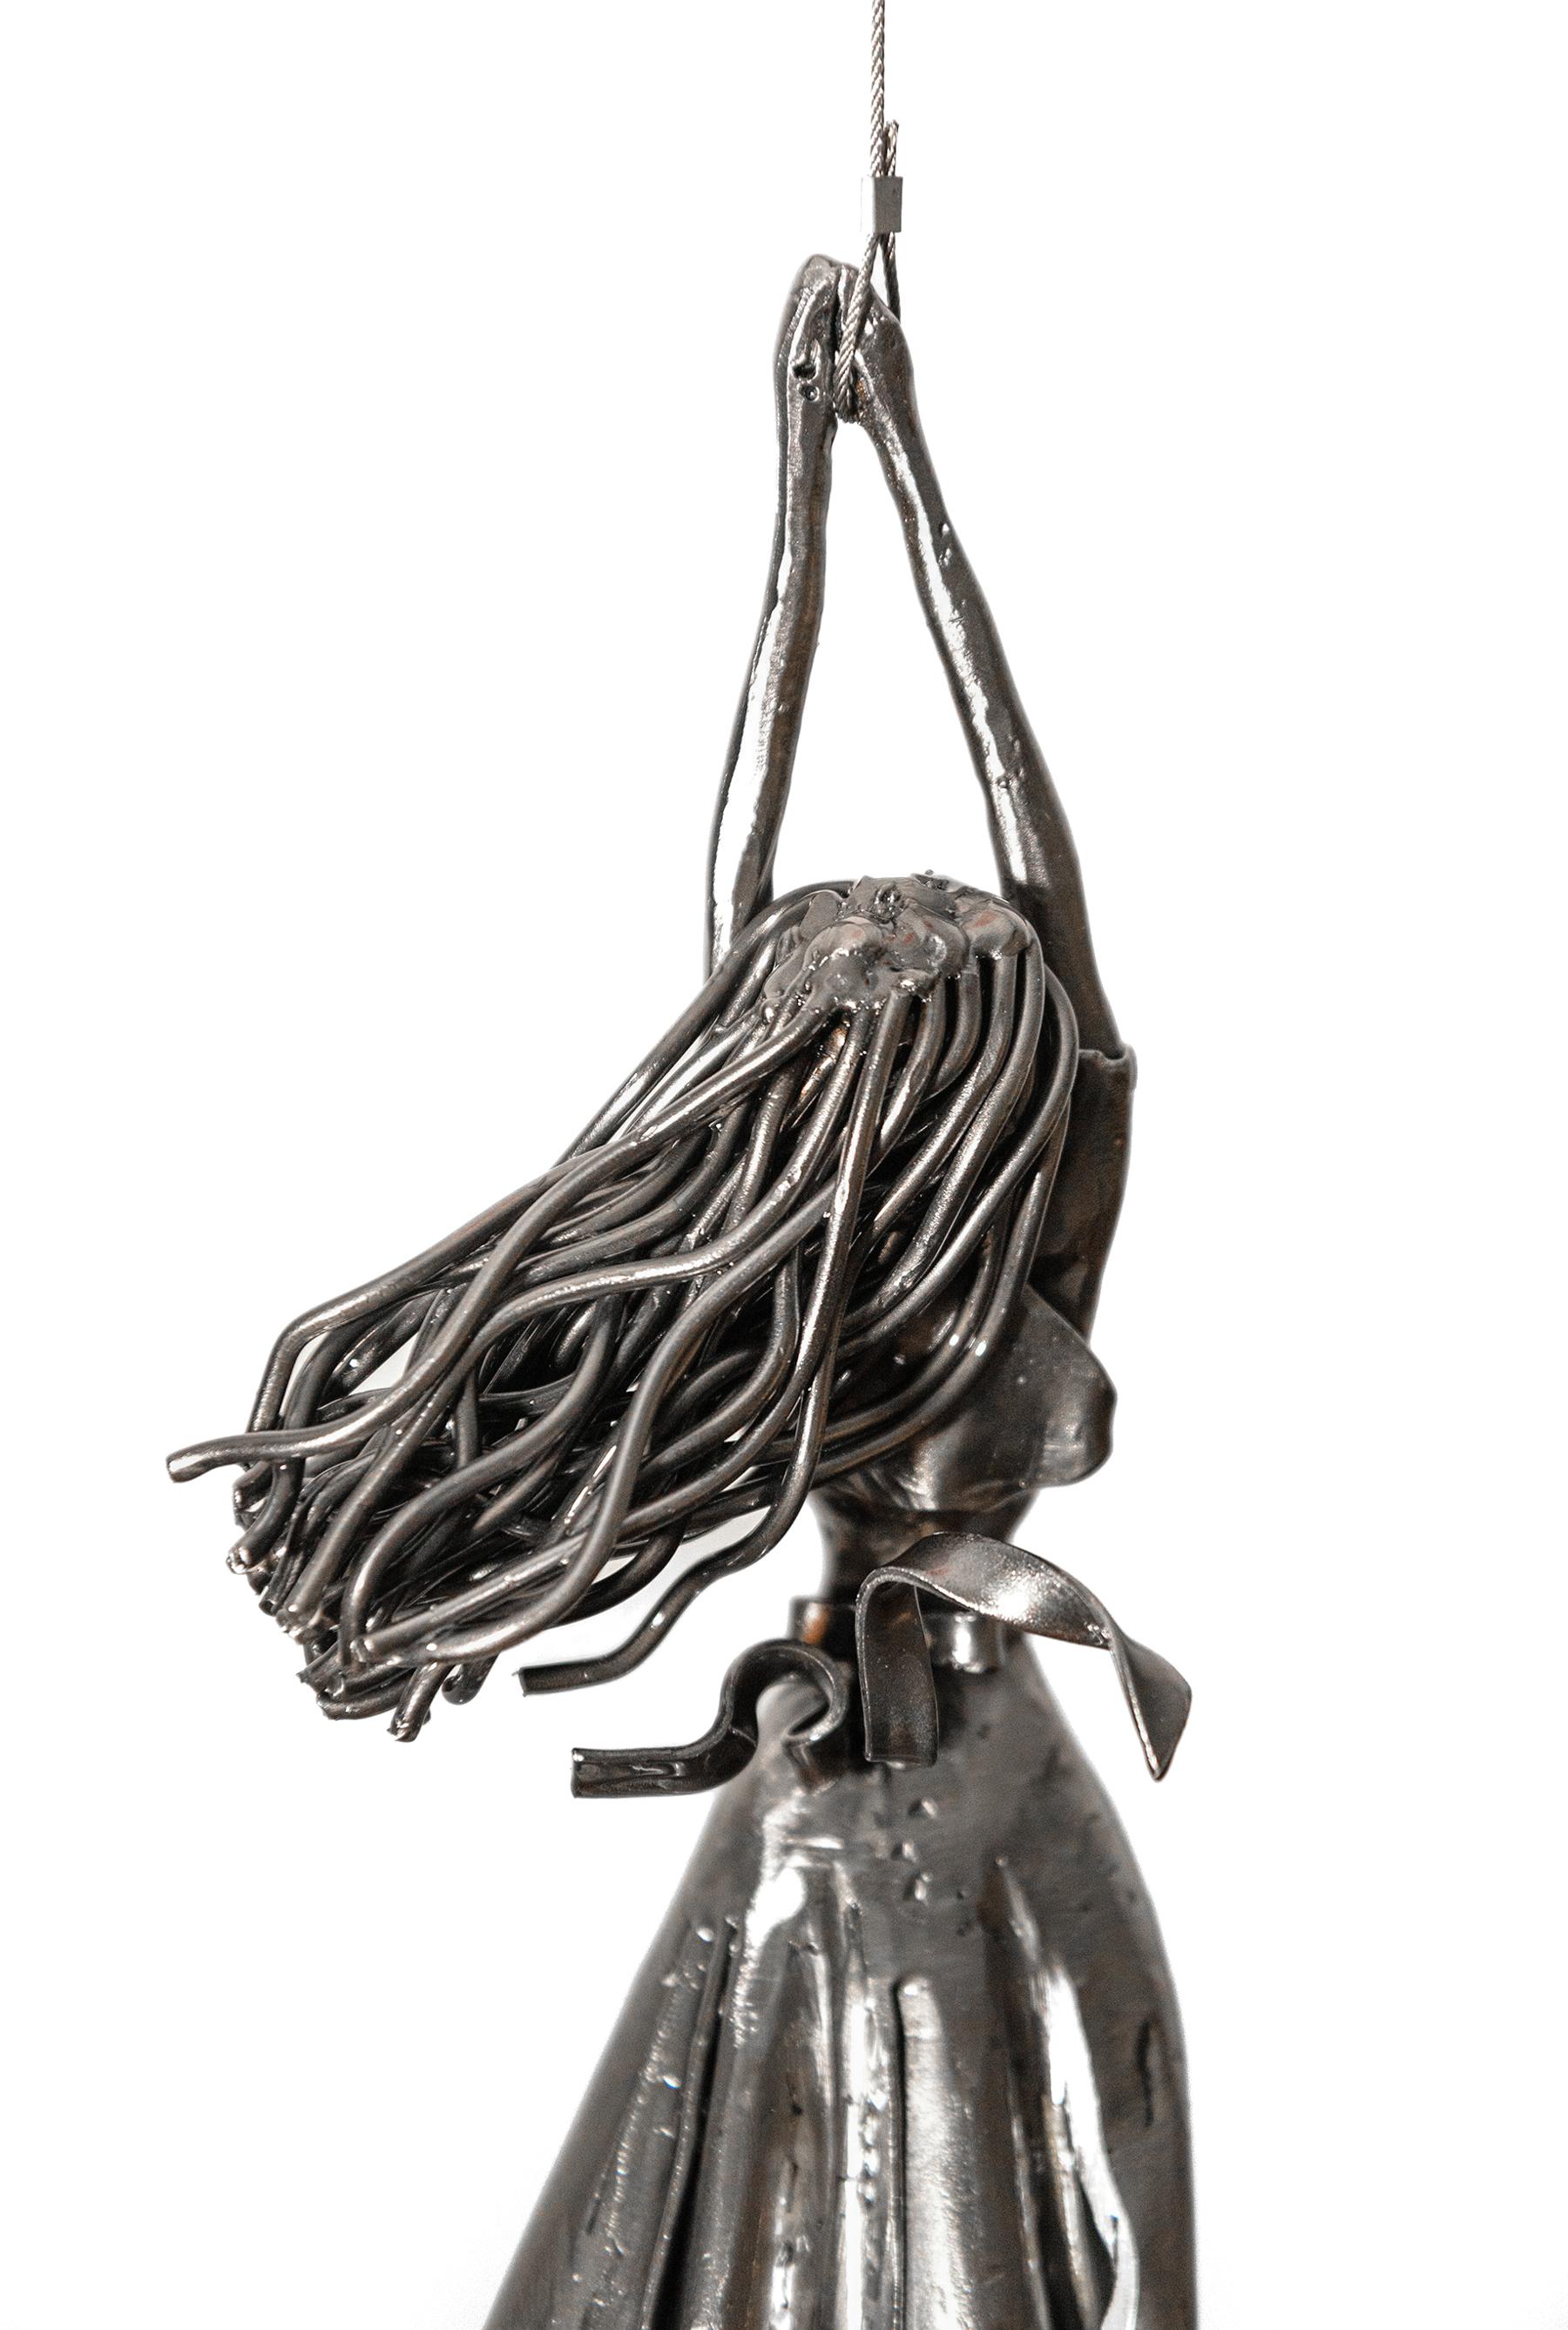 Let it Go - figurative, red balloon, female, hand-hammered steel sculpture - Contemporary Sculpture by Derya Ozparlak